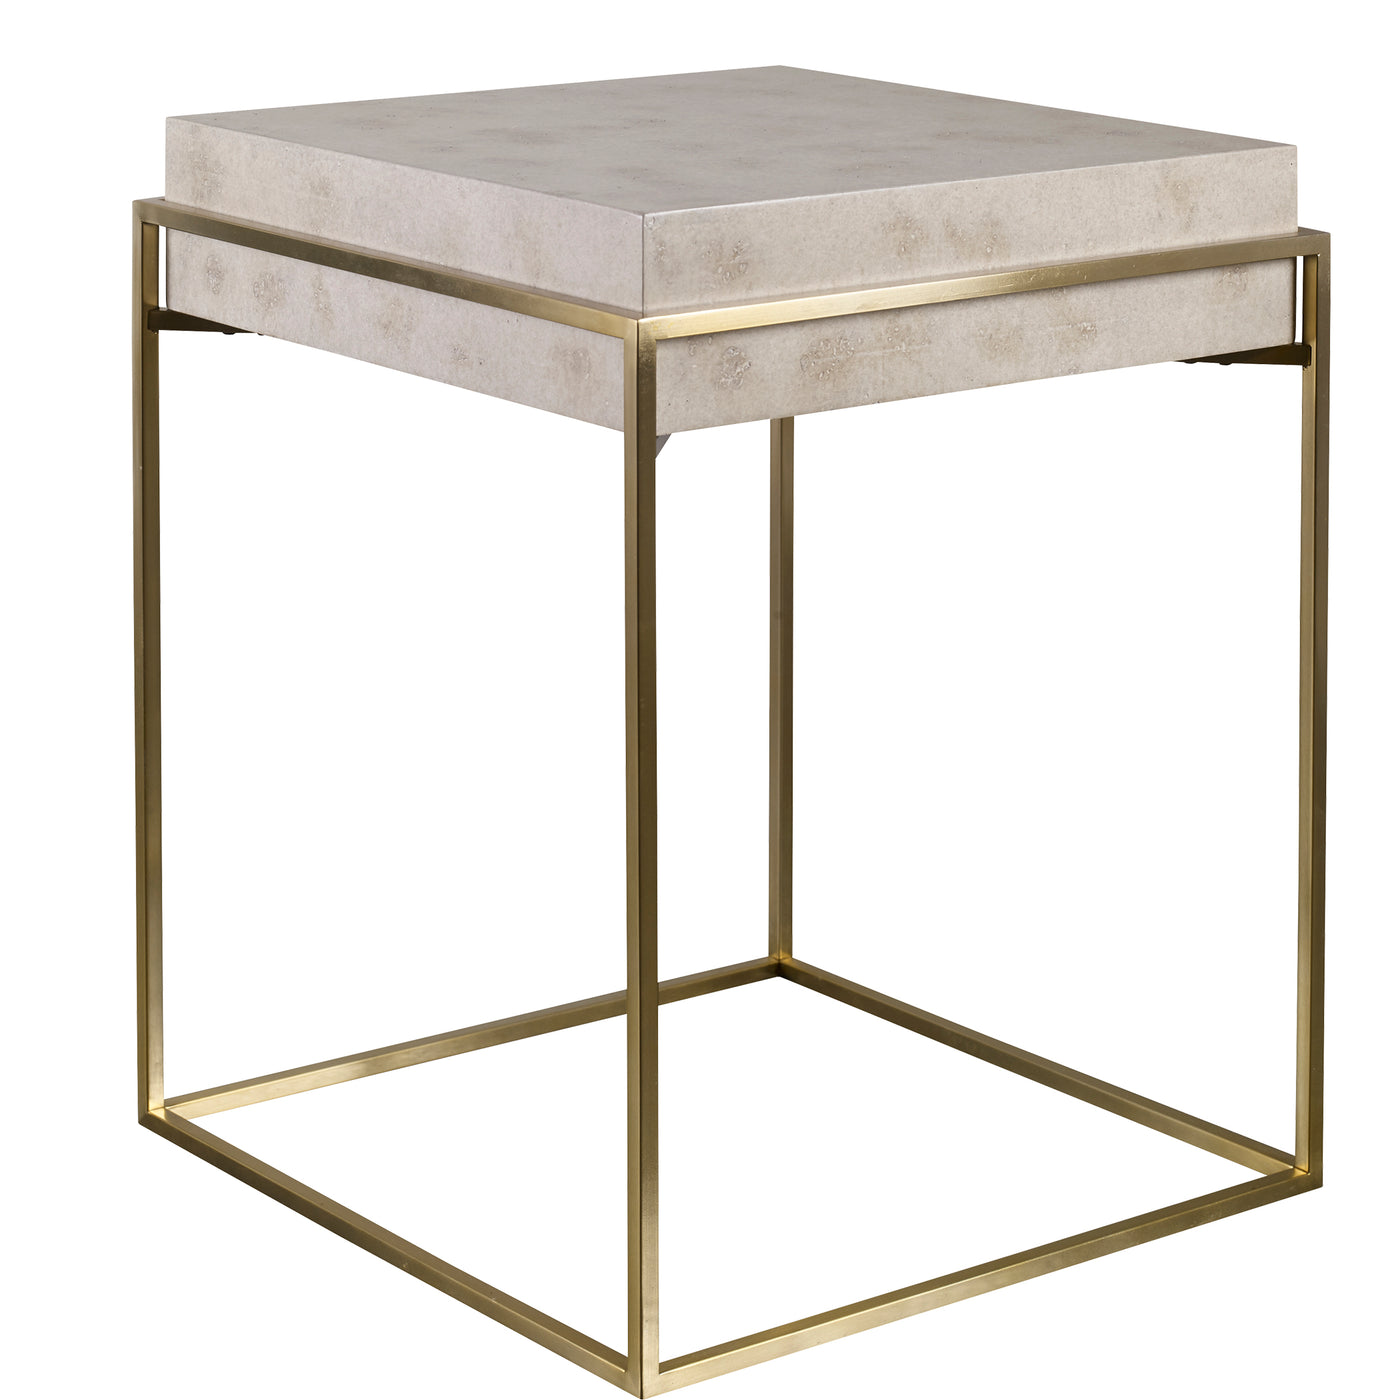 This Clean Modern Accent Table Showcases An Inset Ivory Burl Veneer Top Supported By A Sleek Brushed Brass Plated Stainles...